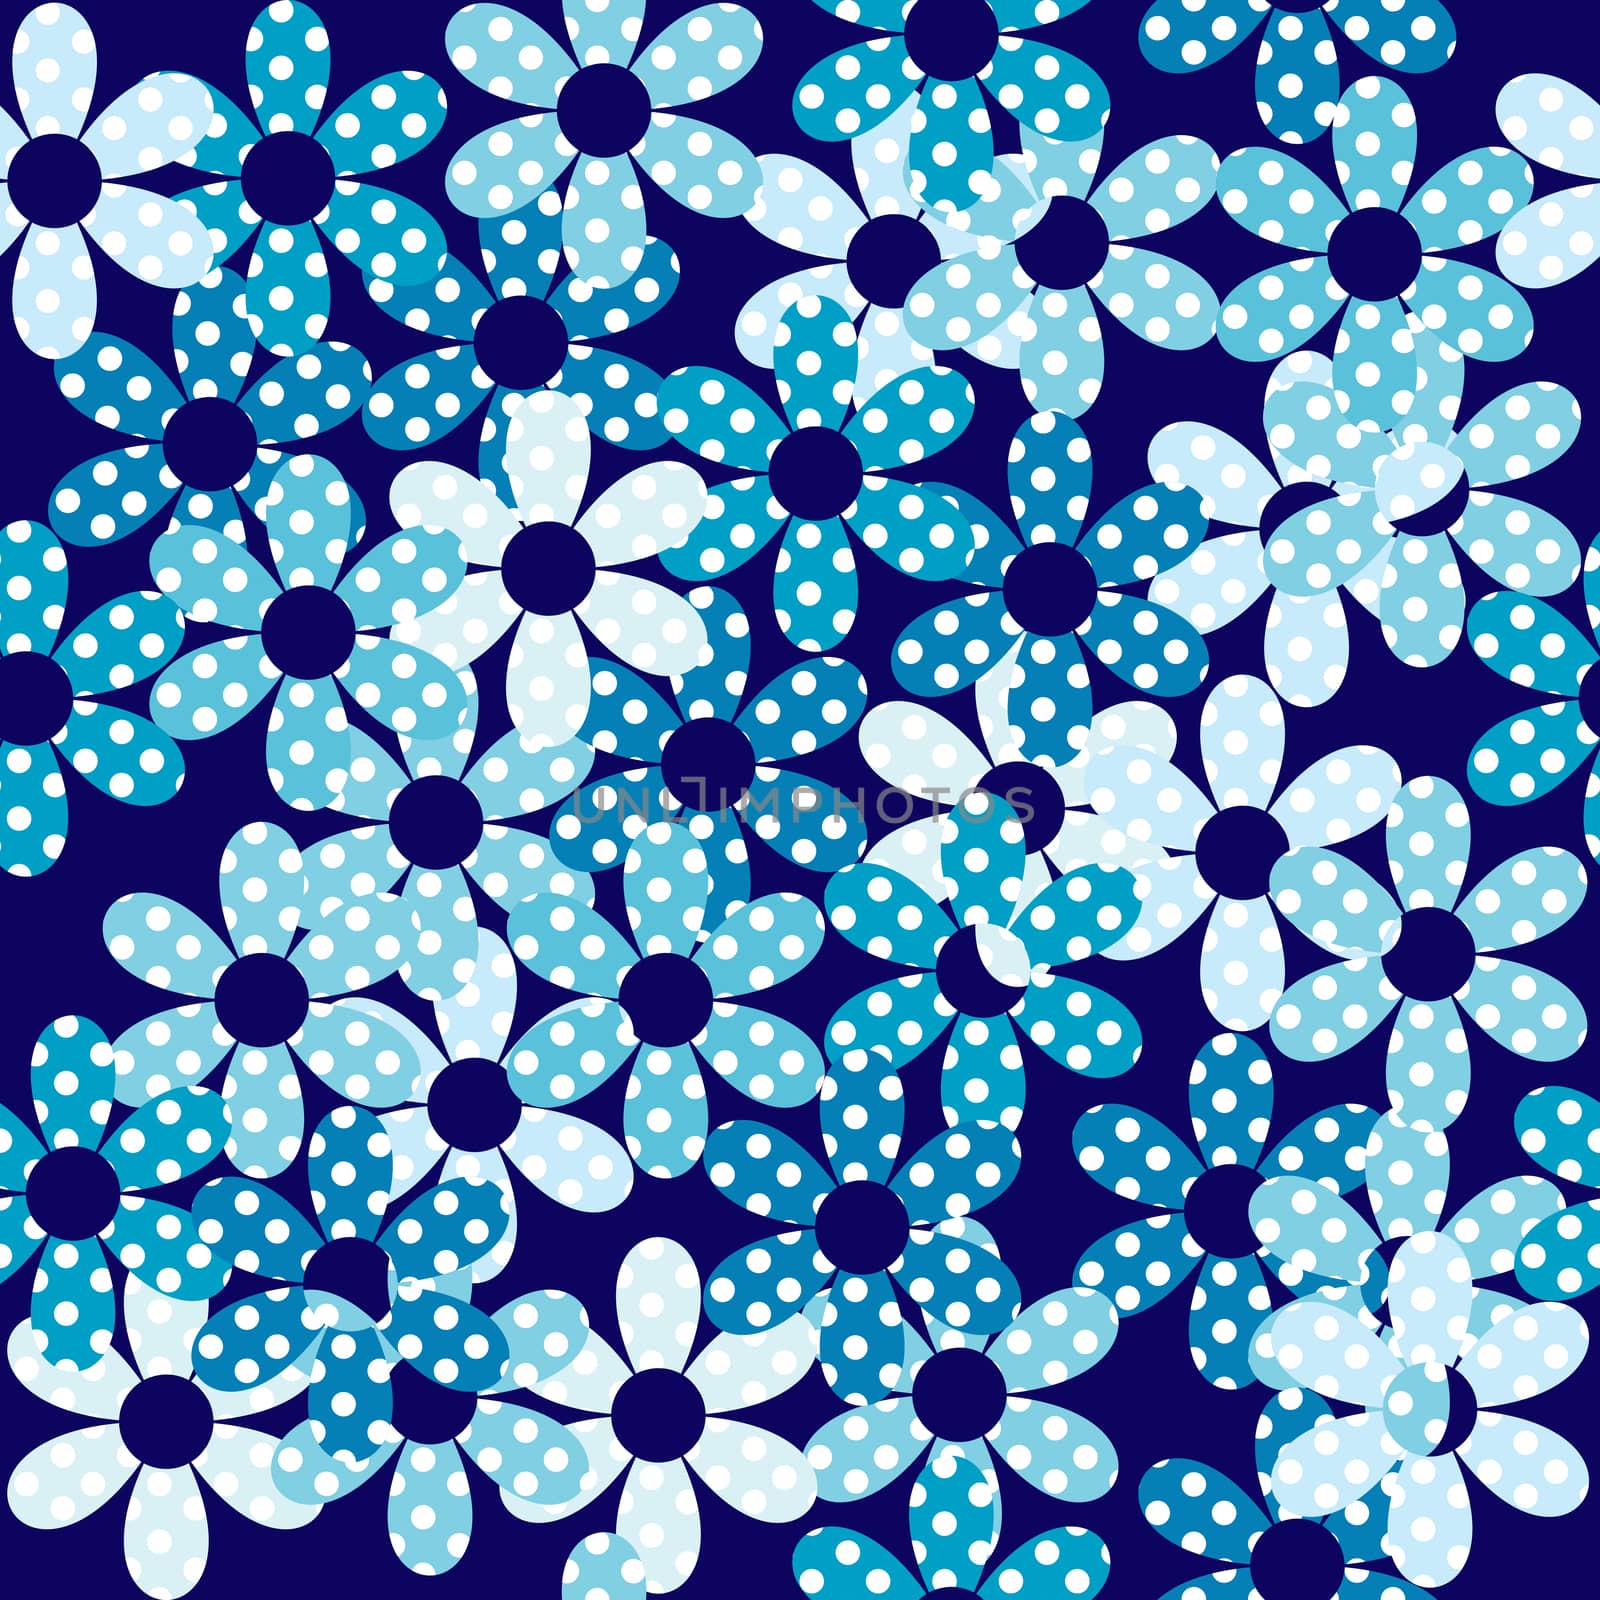 Blue dotted flowers seamless background by hibrida13